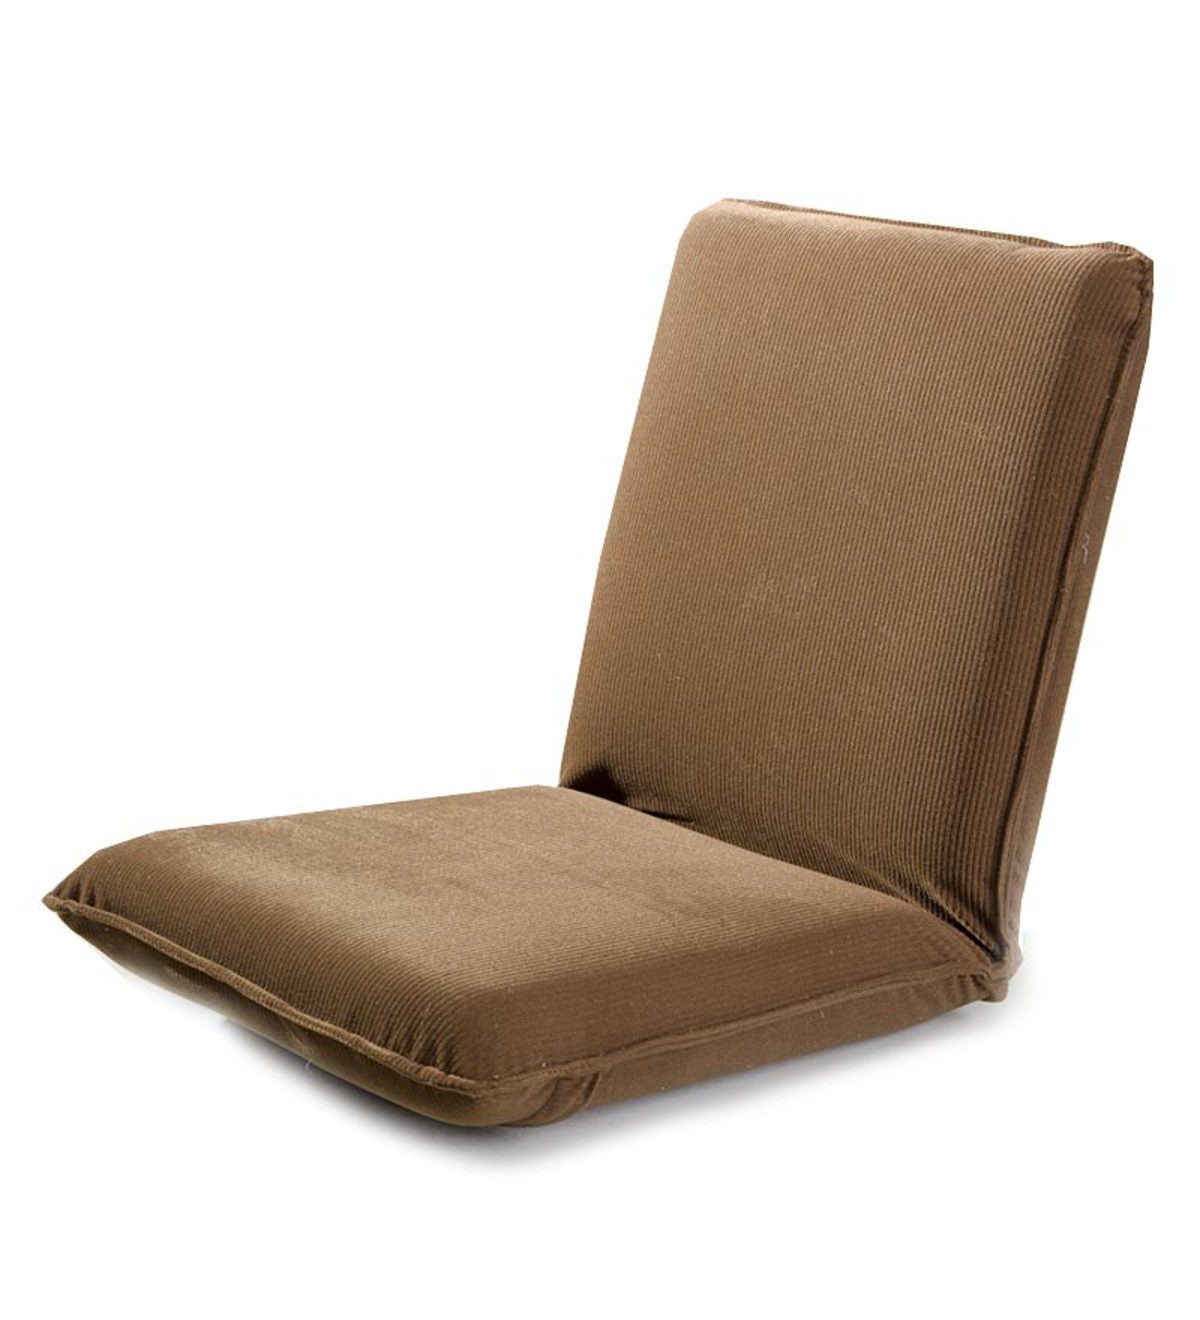 Multiangle Floor Chair with Adjustable Back - Chocolate ...